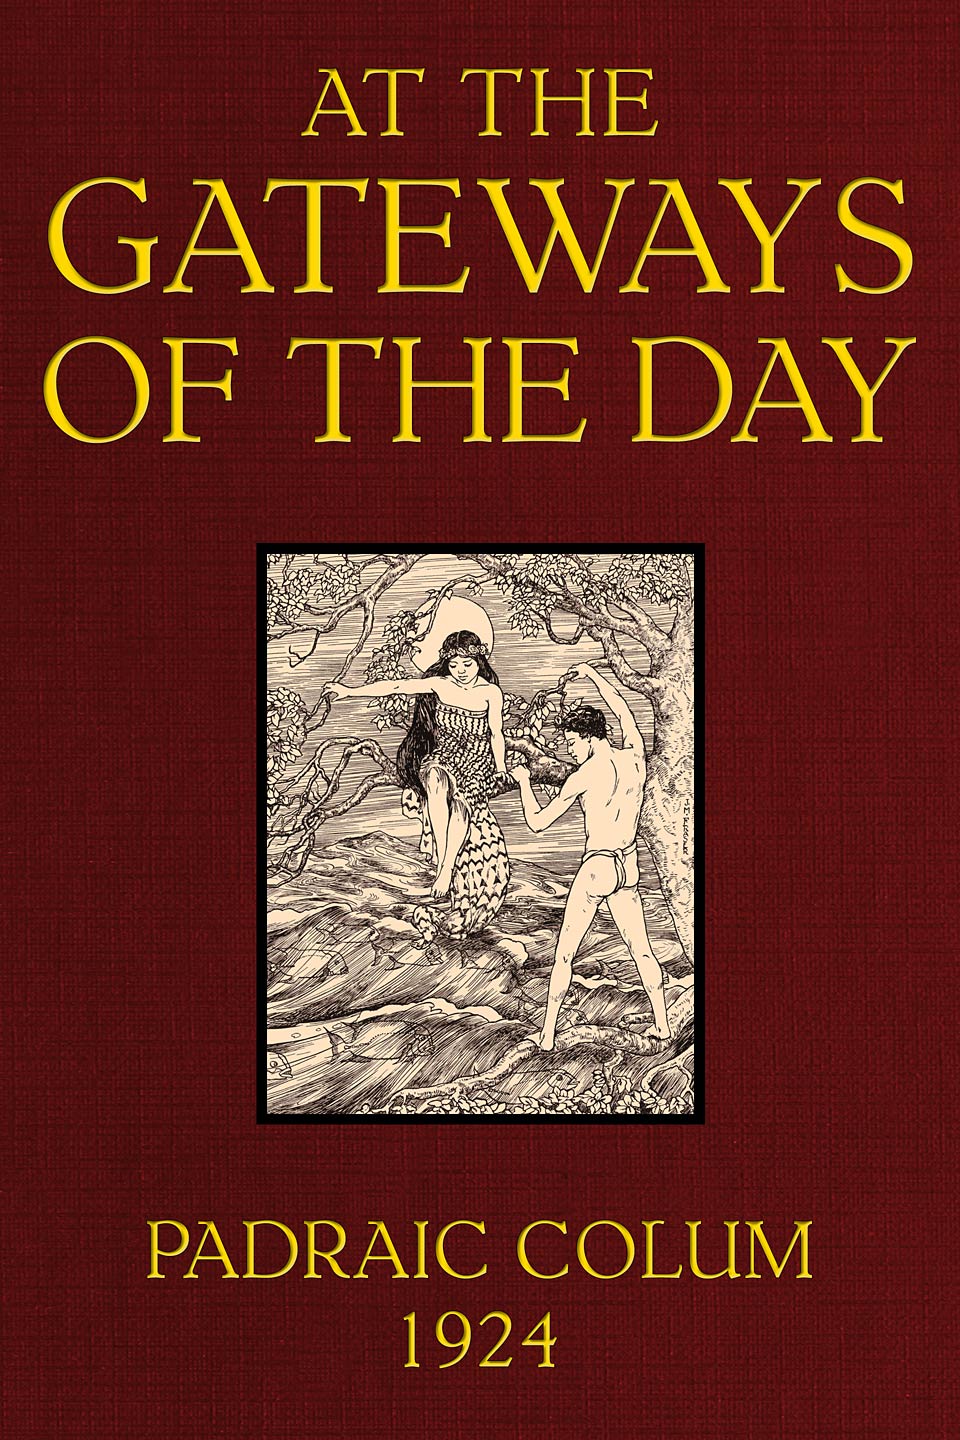 At the gateways of the day